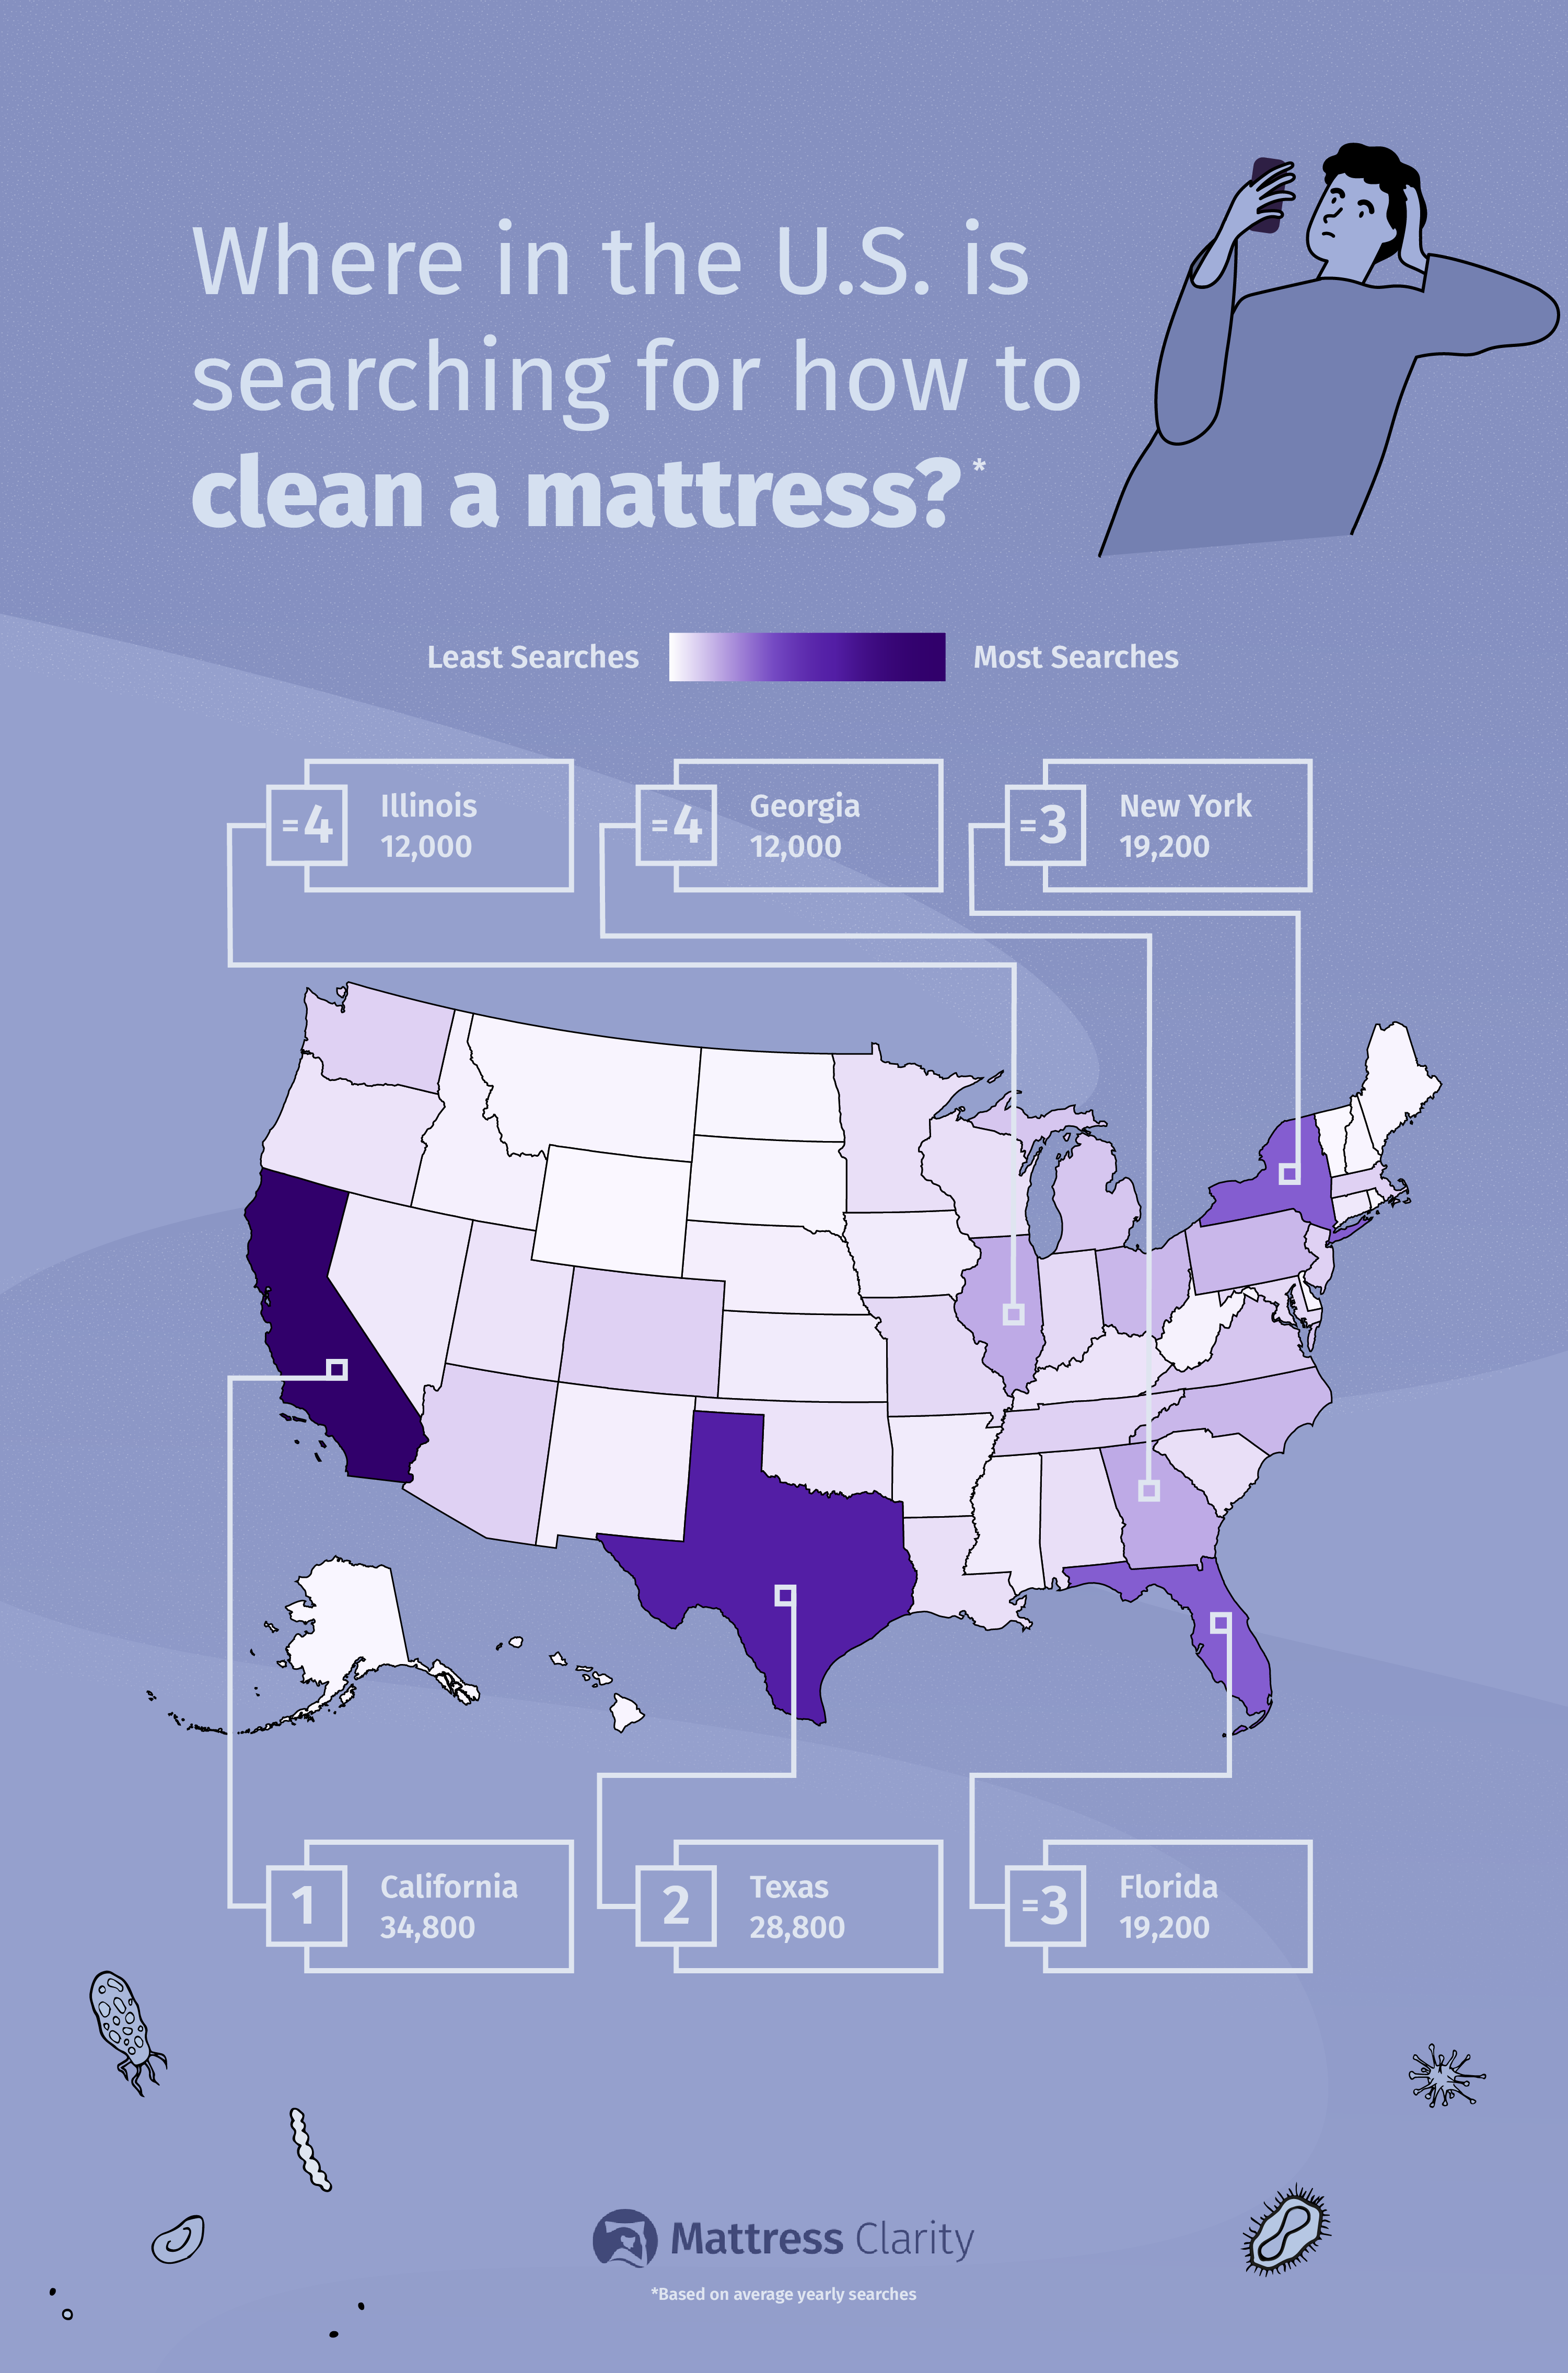 Heat map showing where in America is searching for tips on cleaning mattresses the most.